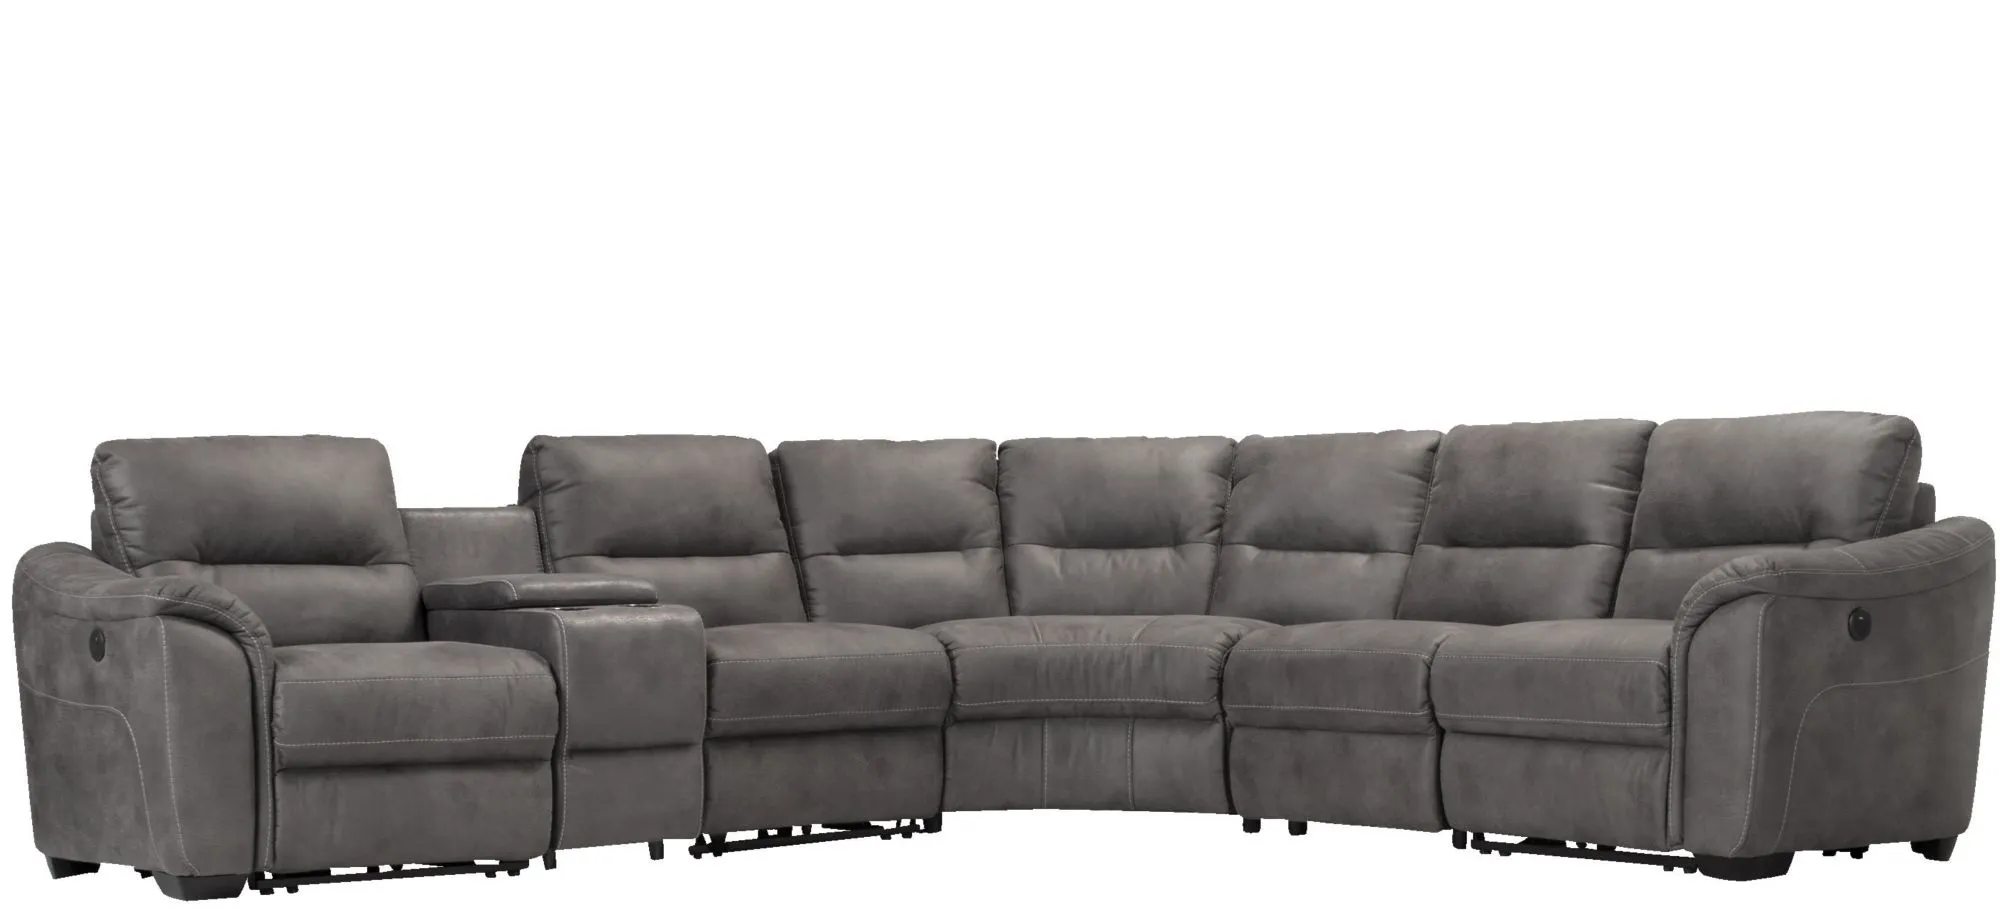 Rockland Microfiber 6-pc. Power Sectional in Gray by Bellanest